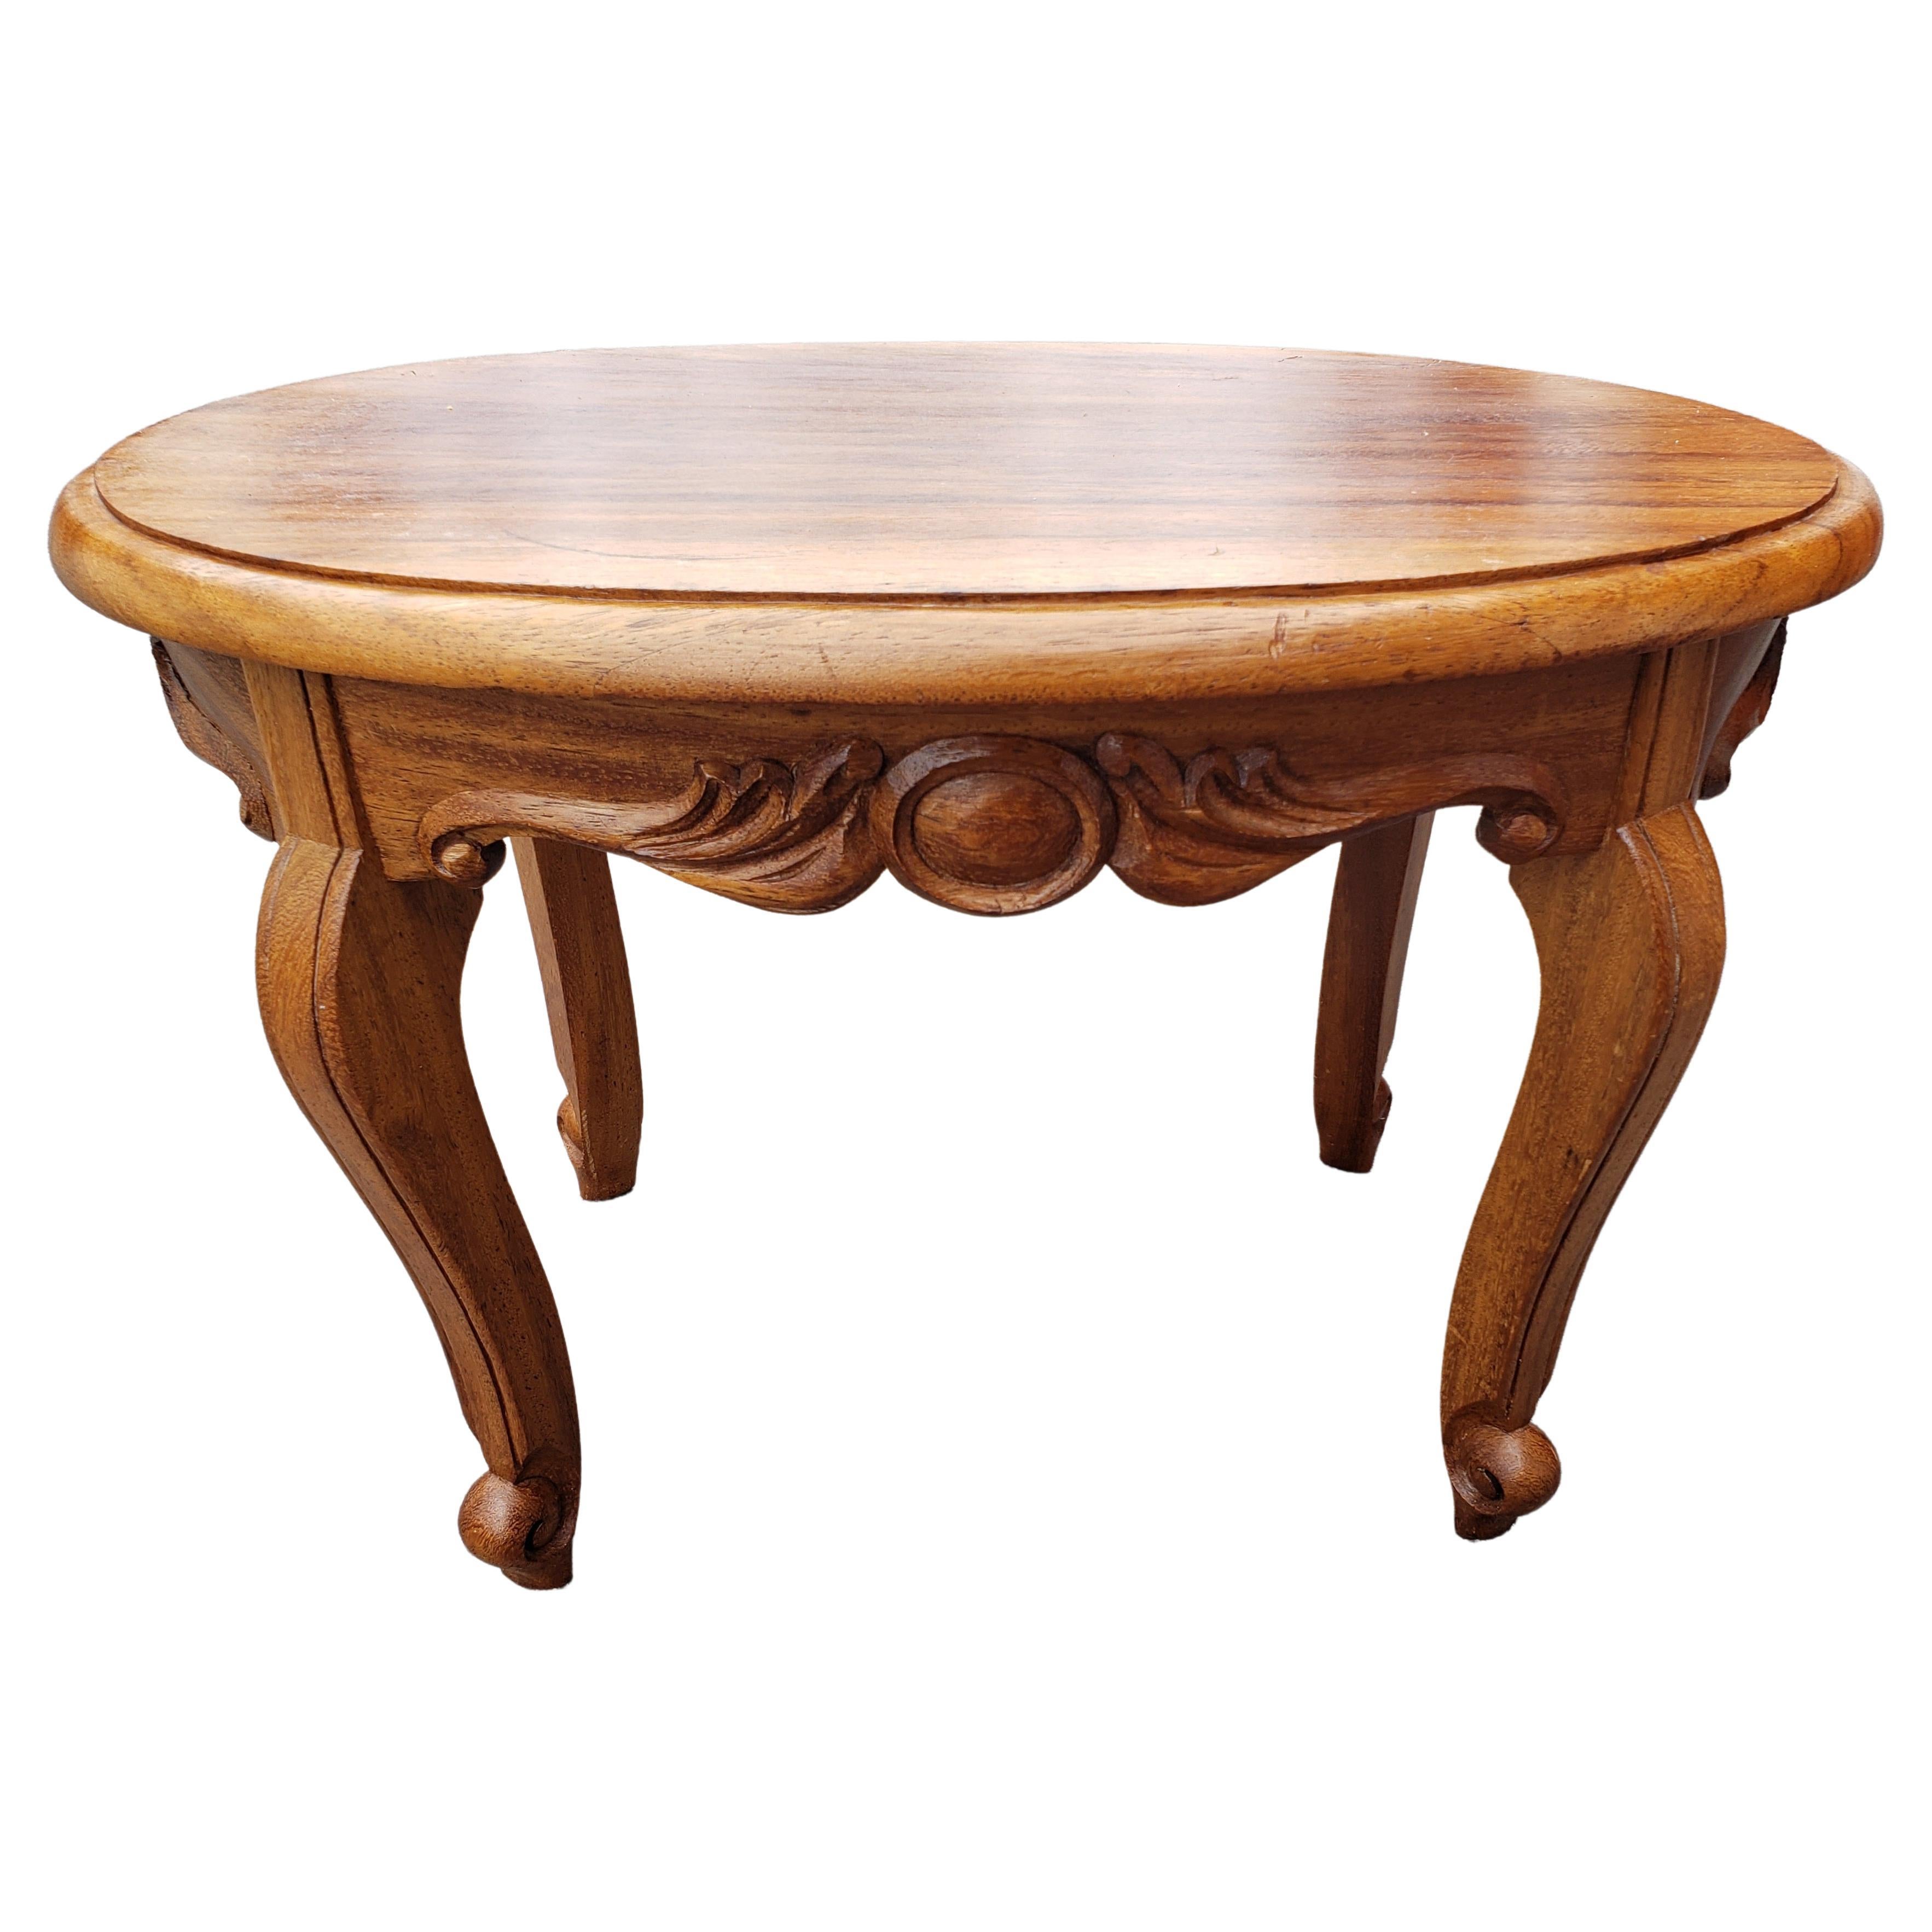 American Classical Amish Hand Crafted Solid Oval Red Oak Wood Desert Table Side Table, Circa 1970s For Sale